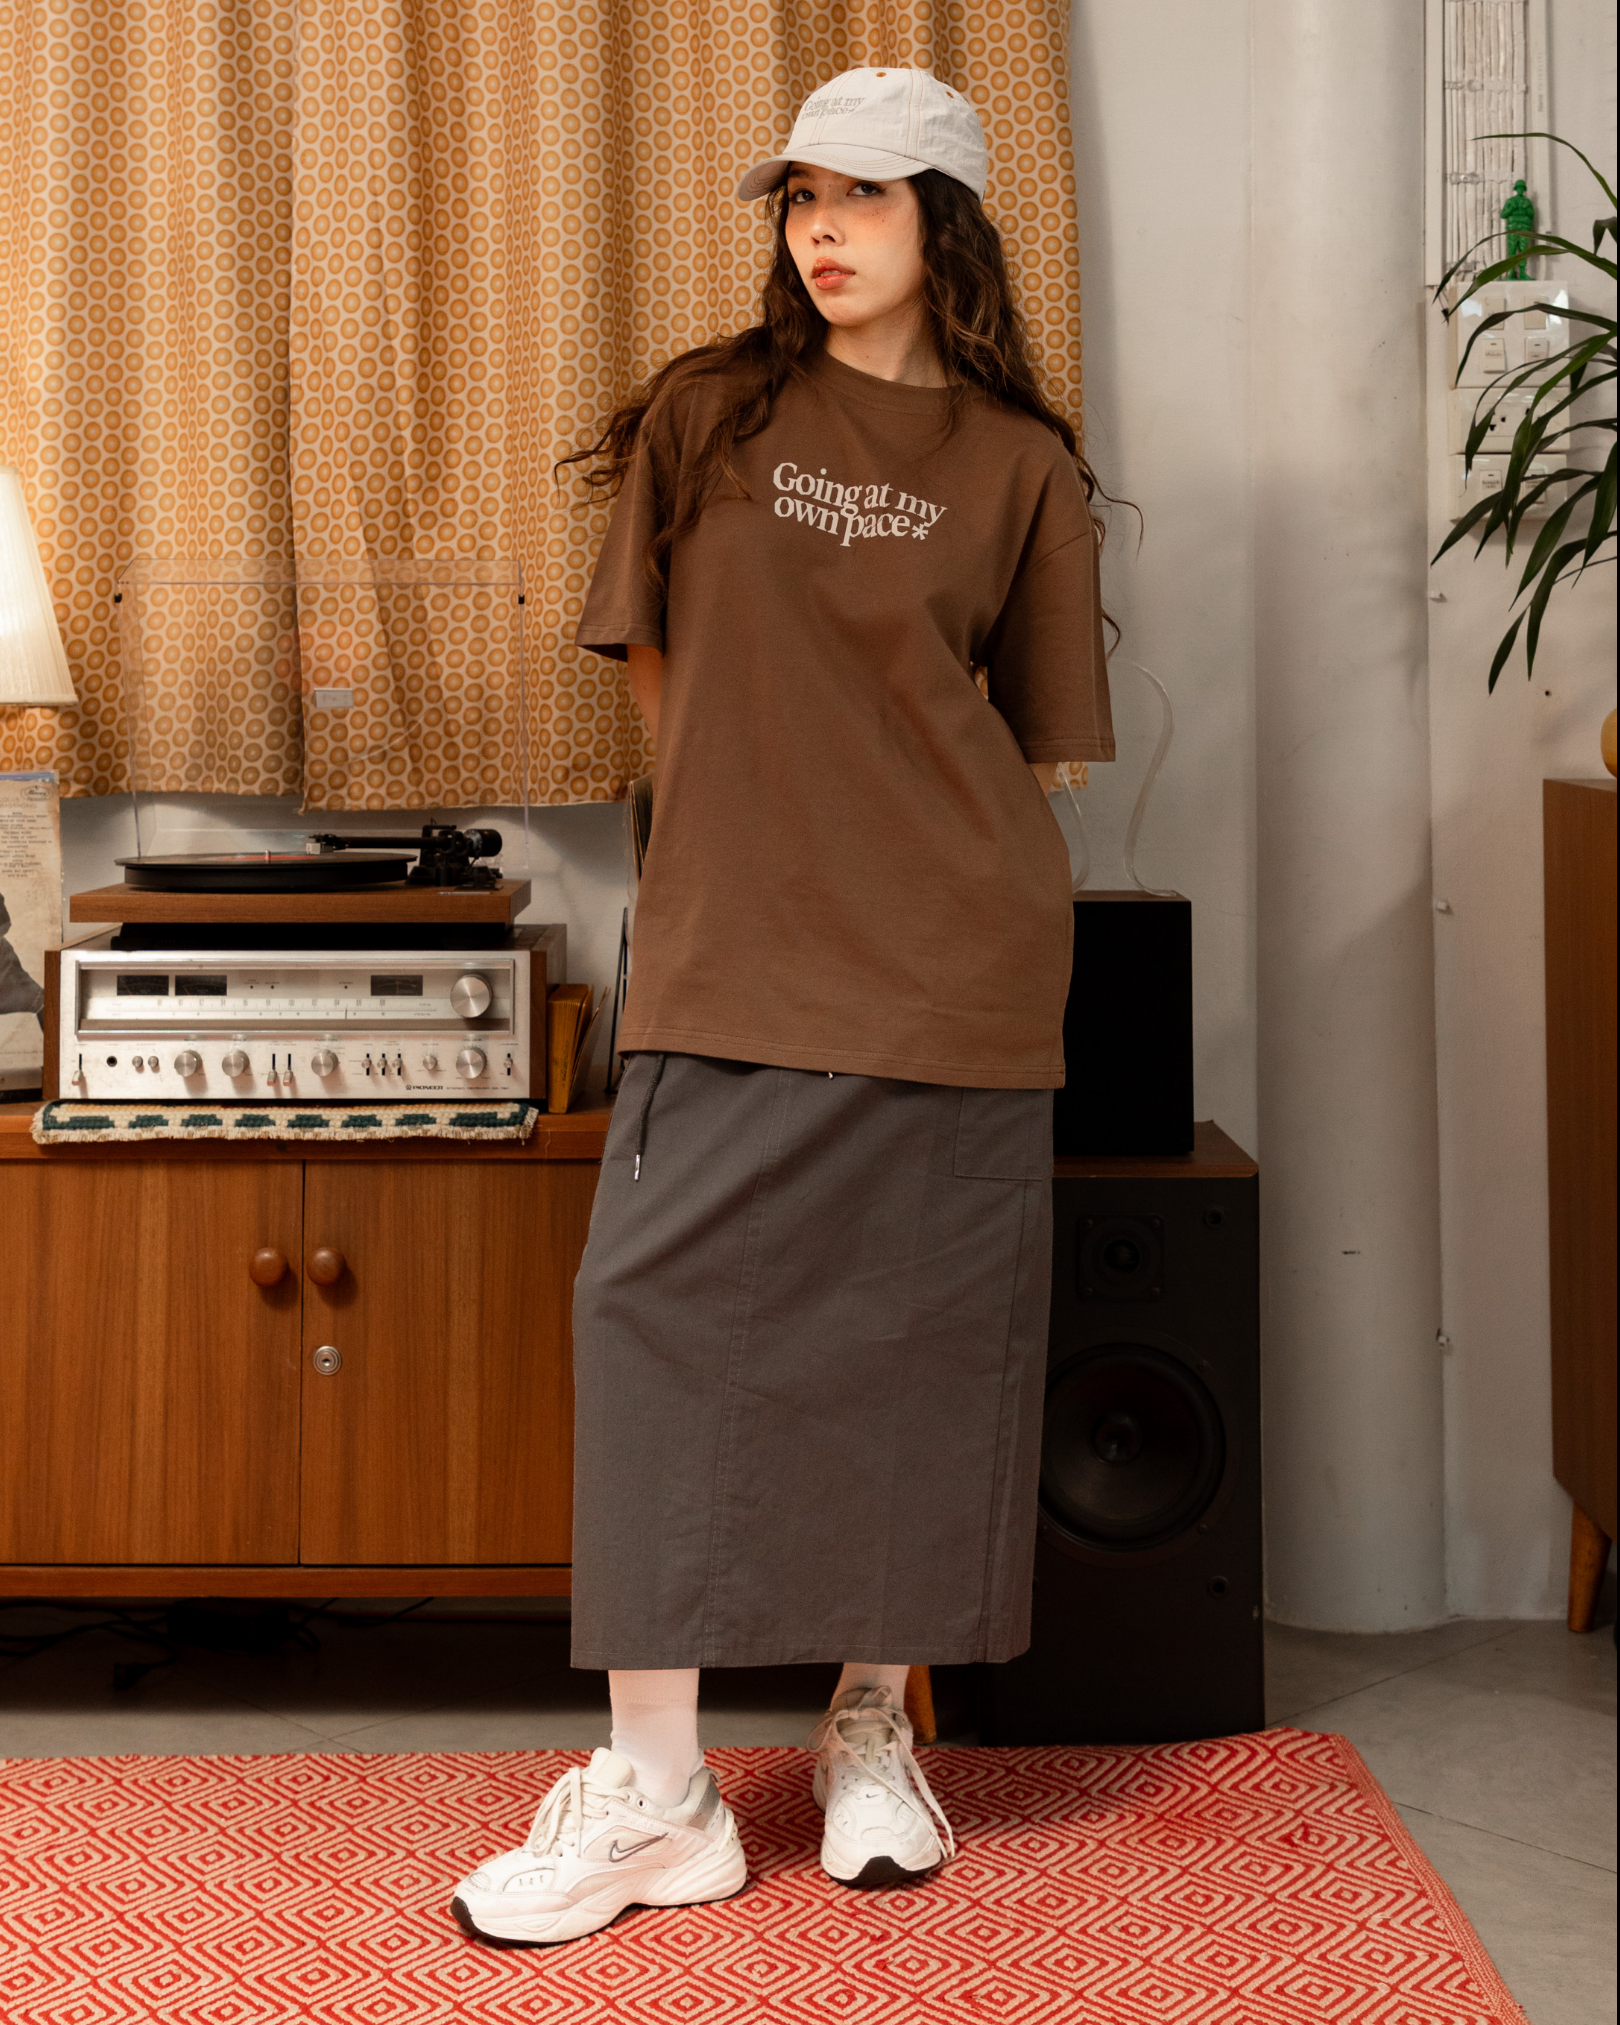 My Own Pace Oversized Tee (Choco)